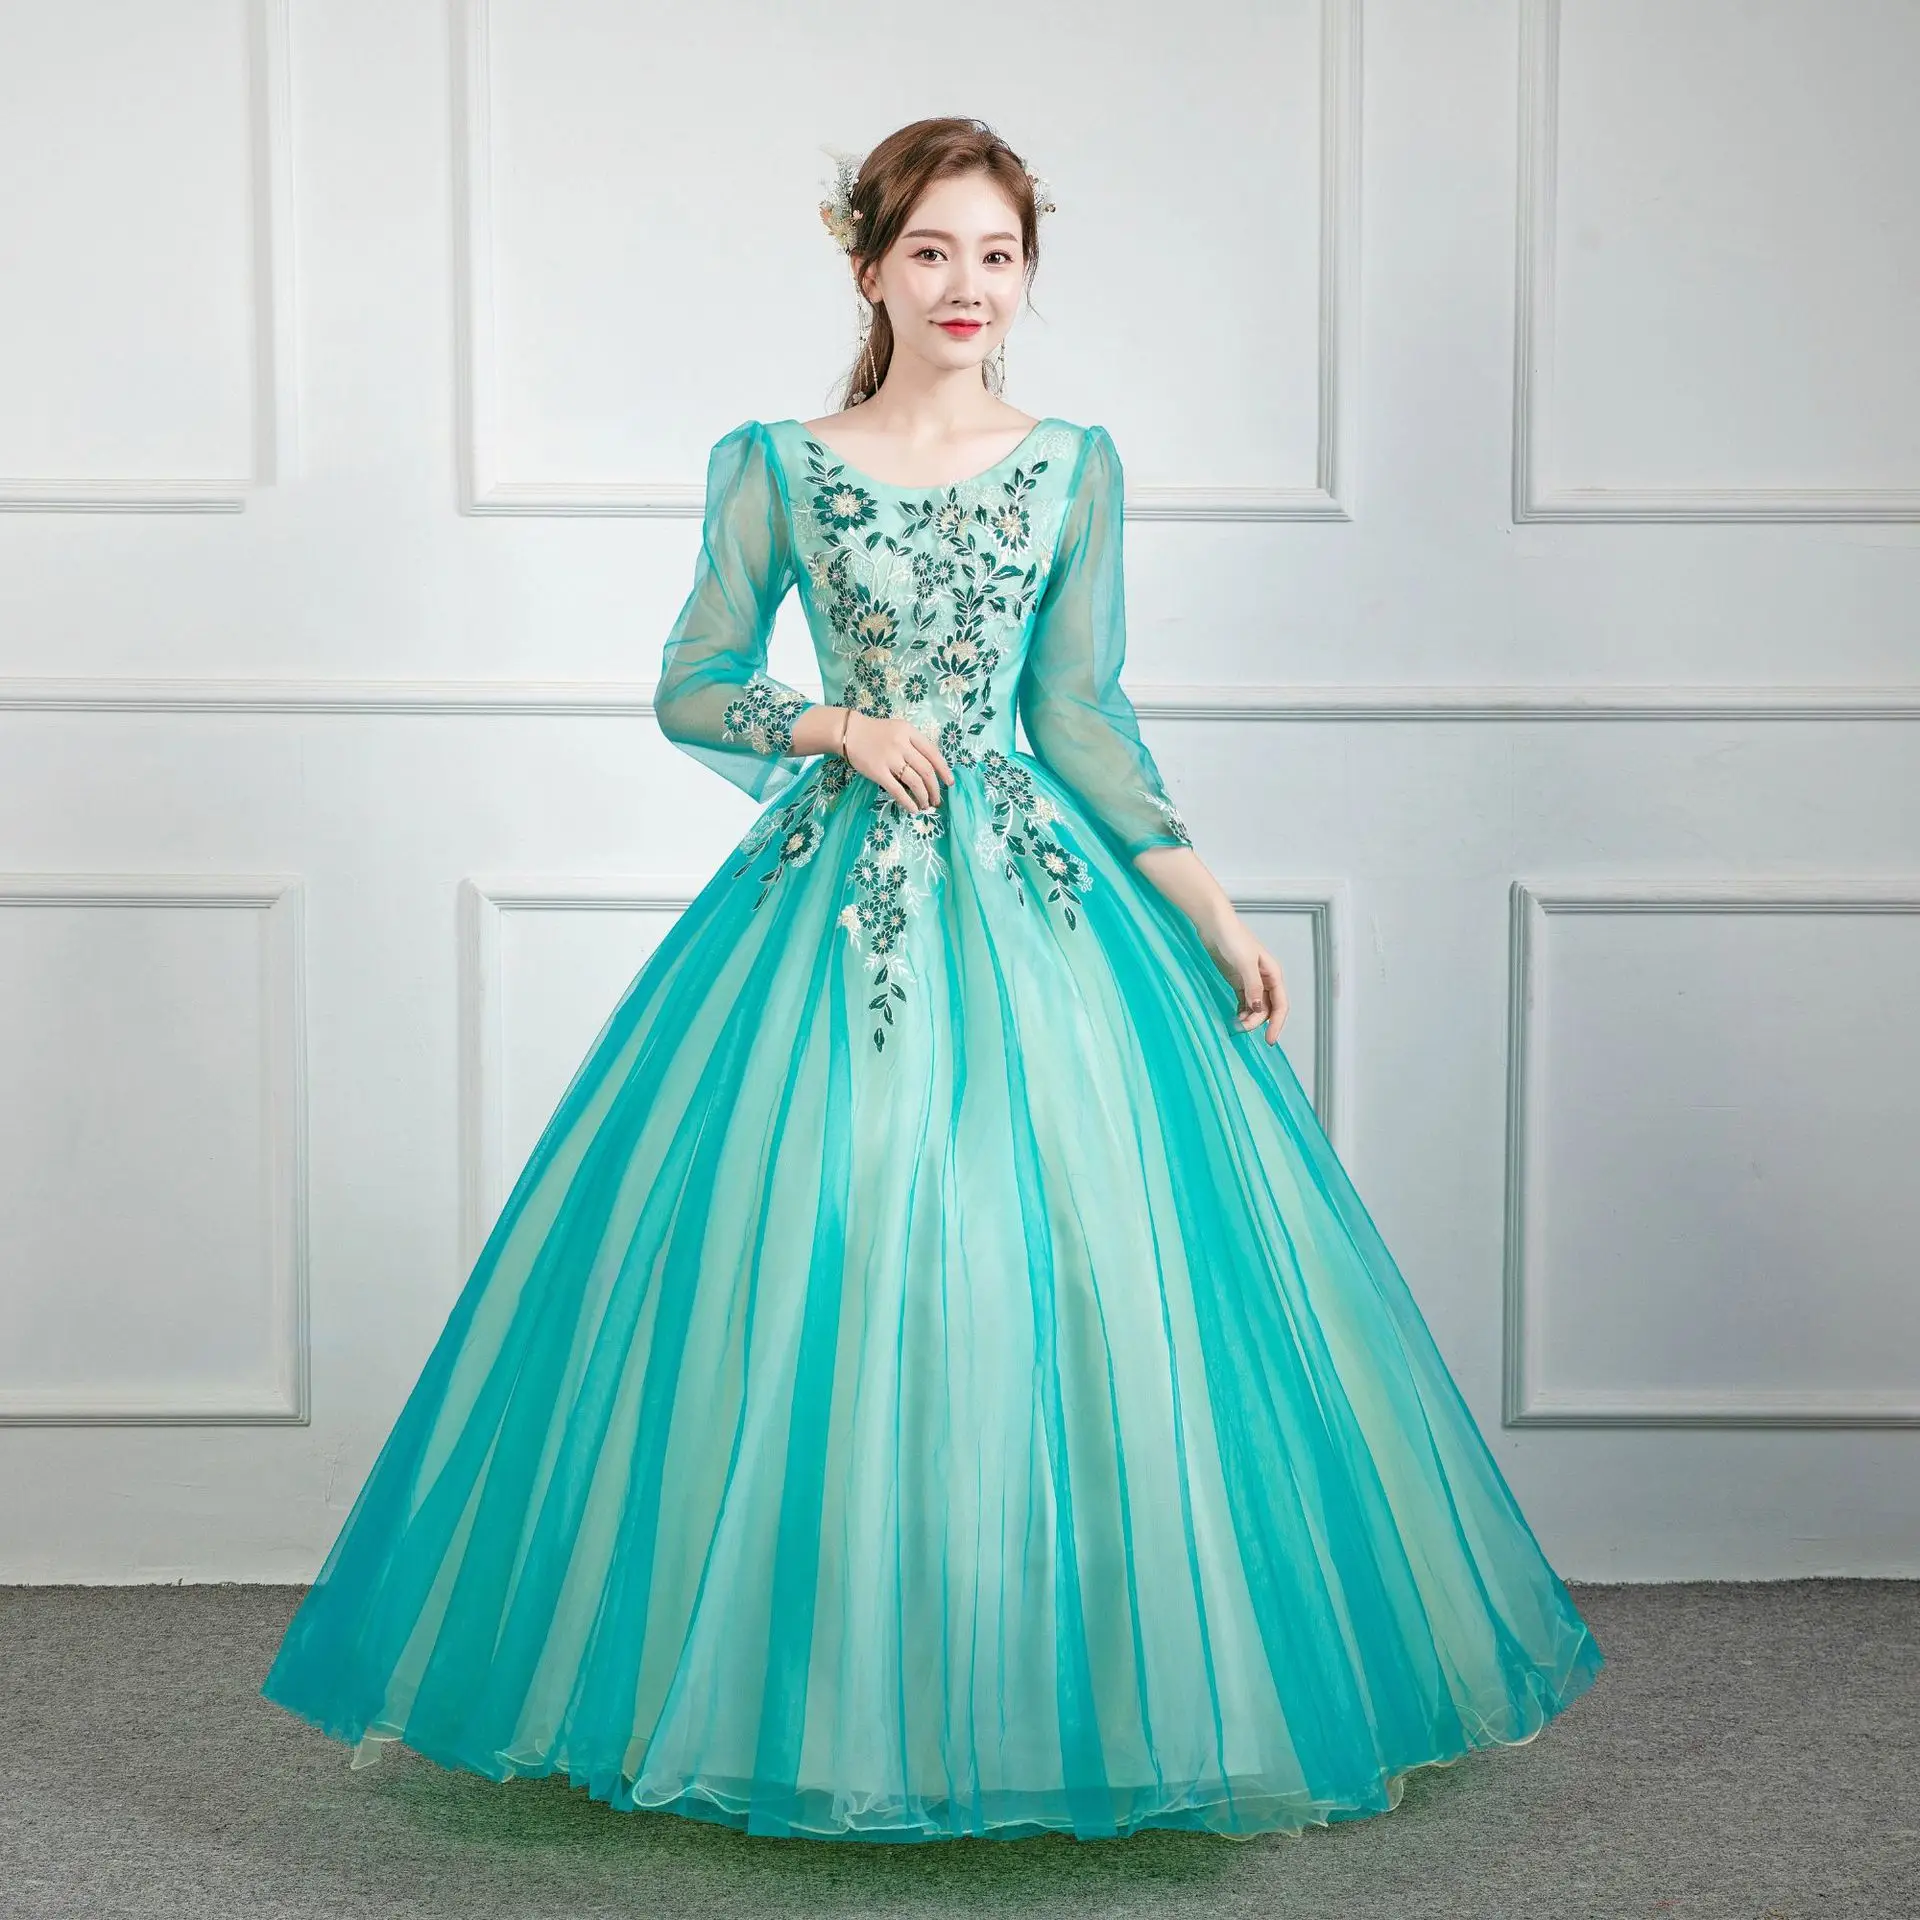 

GUXQD Ball Gown Quinceanera Dresses Appliques Puff Sleeves Prom Birthday Party Gowns Formal robes de soirée